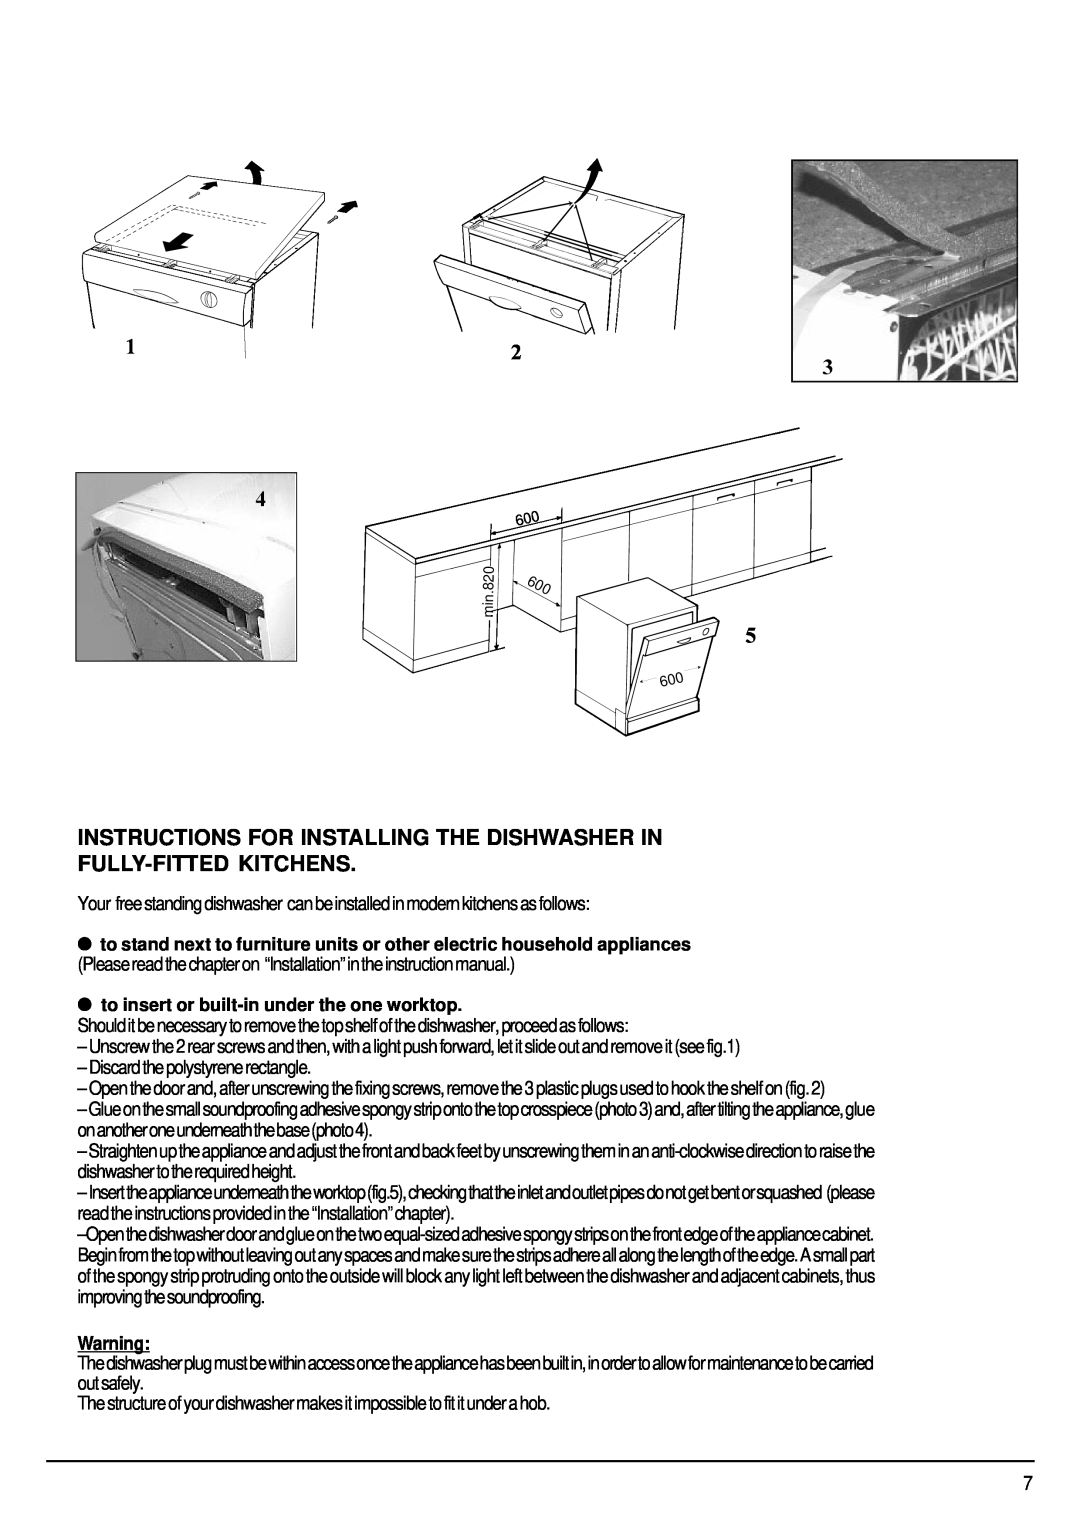 Hotpoint FDW85 manual Instructions For Installing The Dishwasher In, Fully-Fittedkitchens 